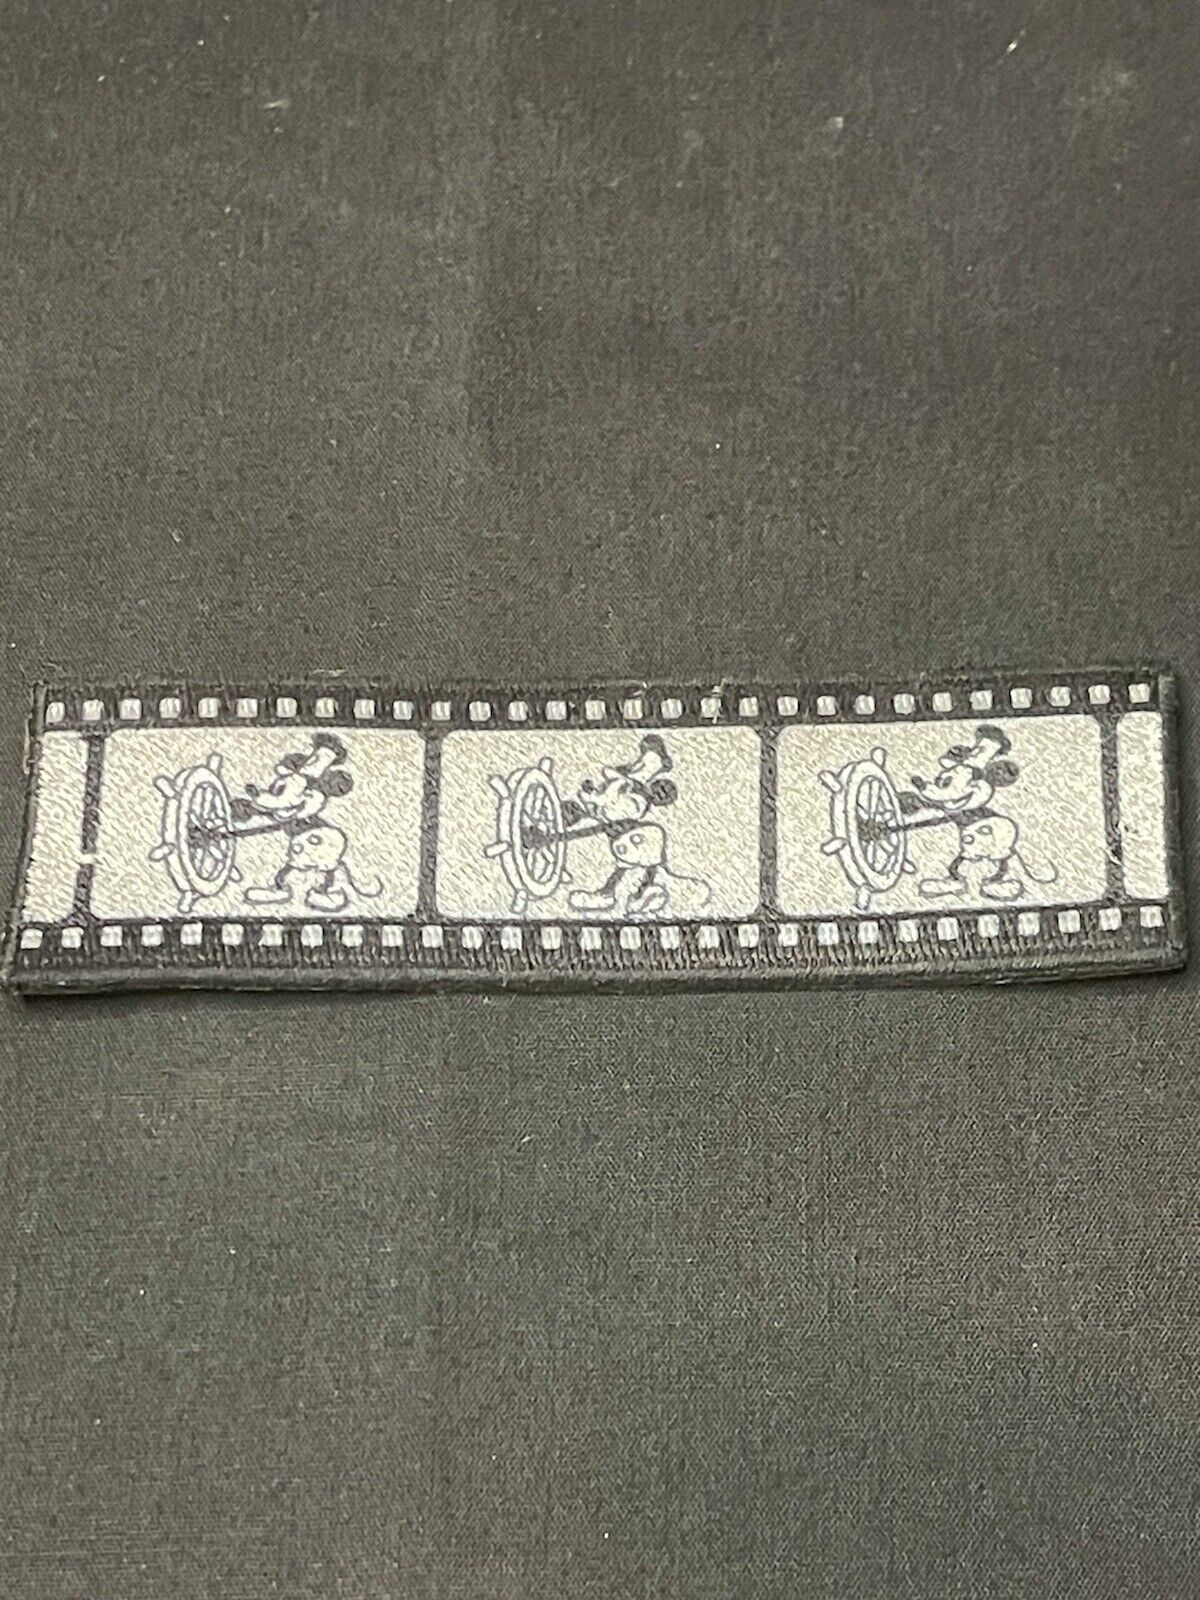 Steamboat Willie Patch Mickey Mouse Walt Disney Reel Loungefly 